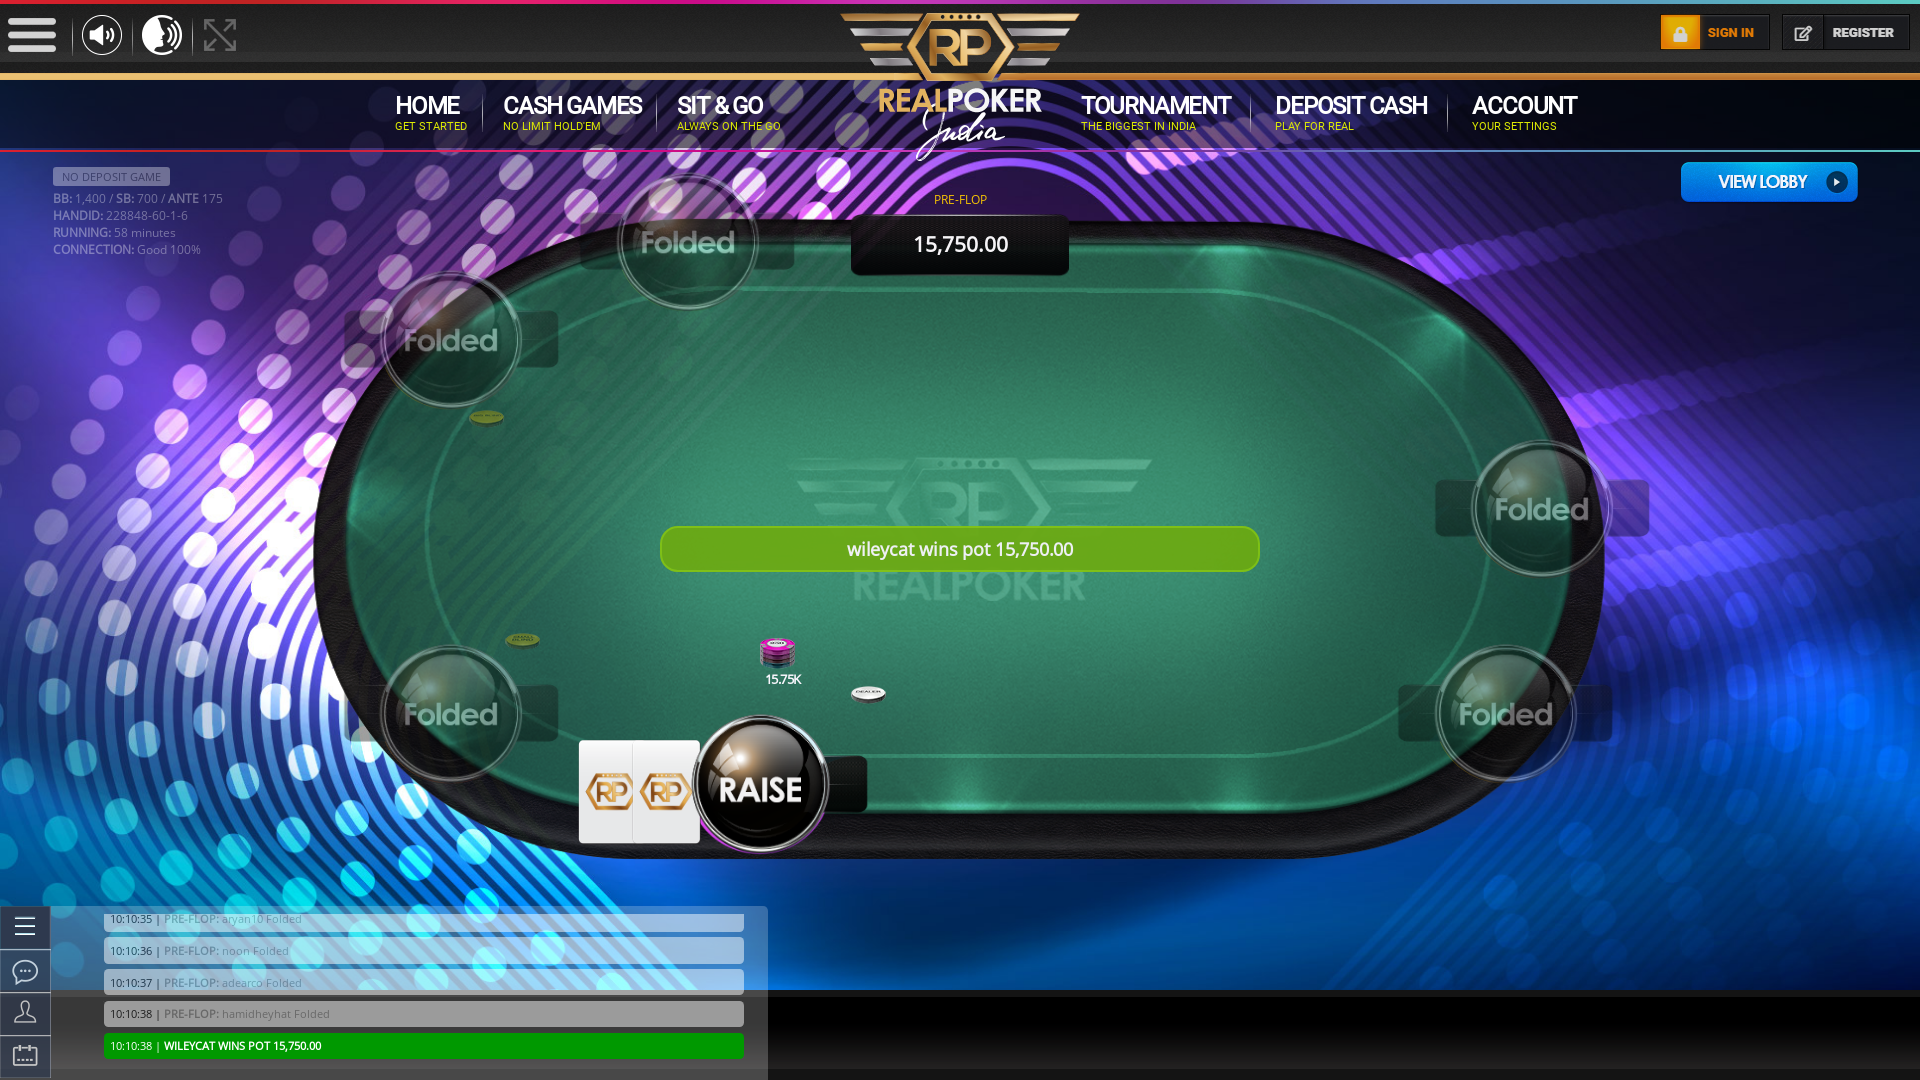 Indian online poker on a 10 player table in the 57th minute match up